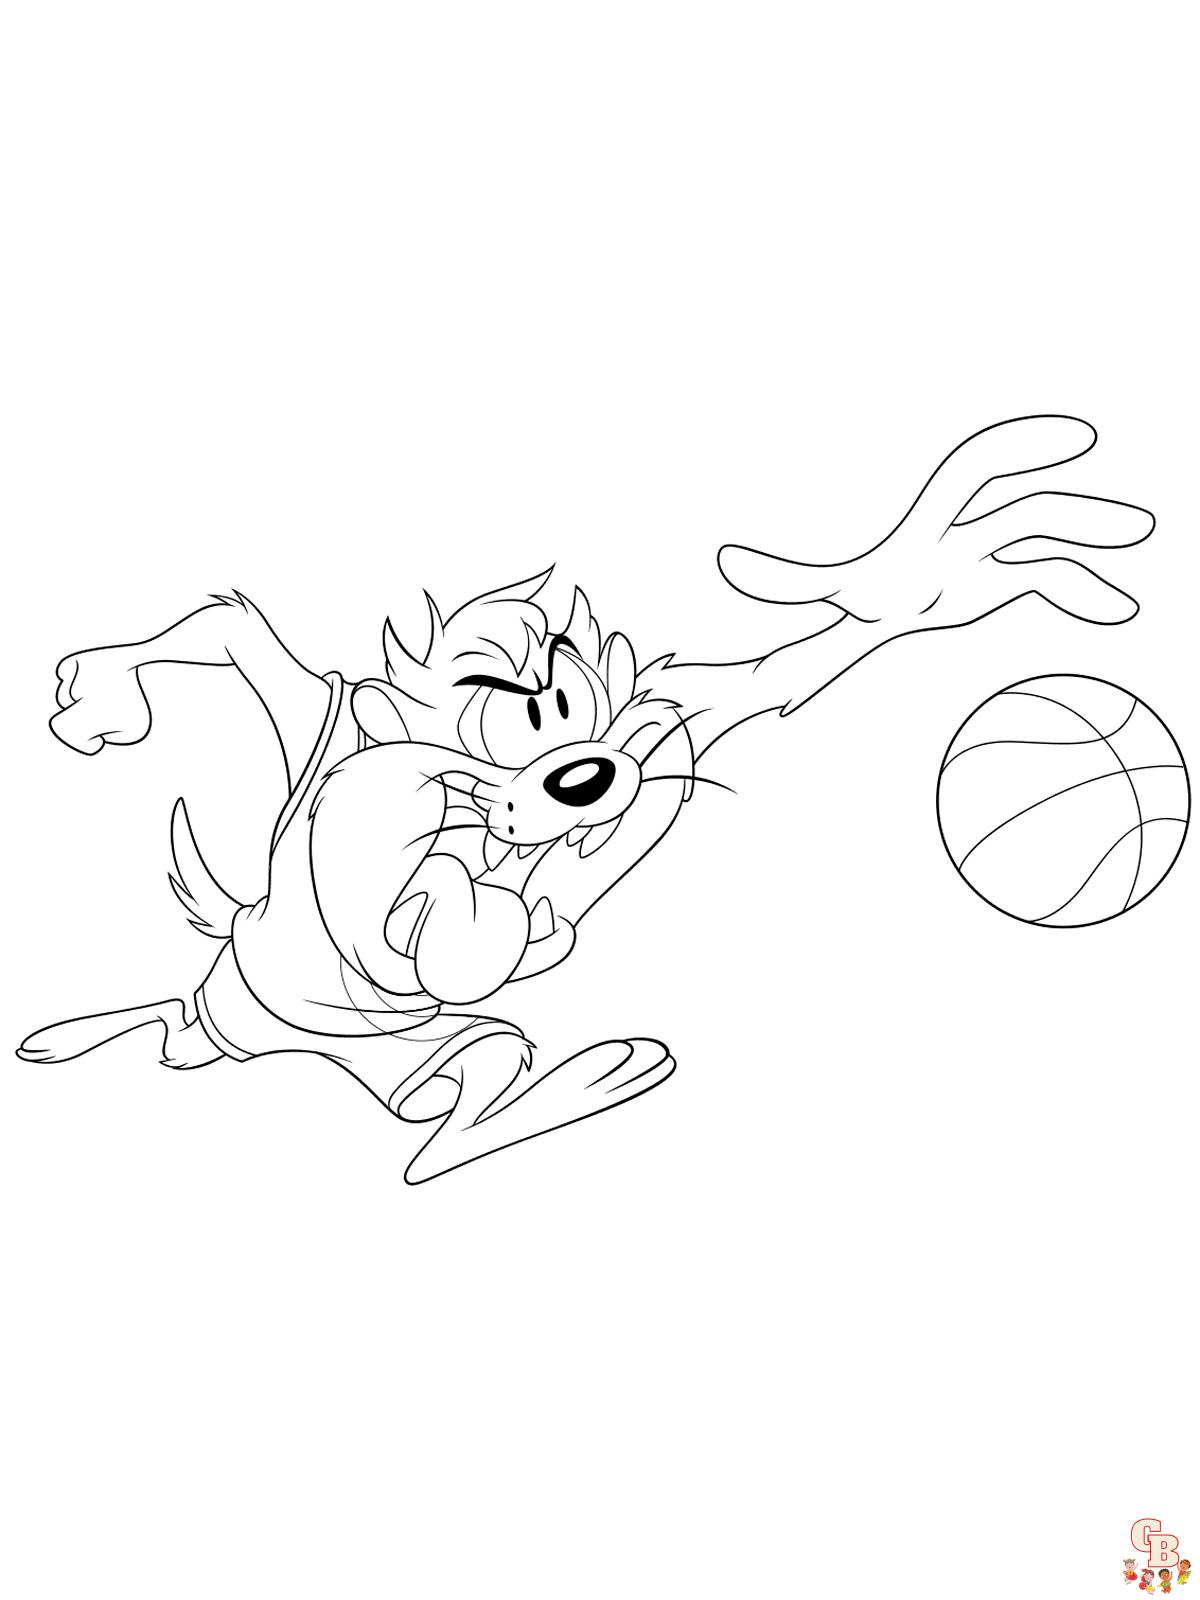 Space Jam Coloring Pages